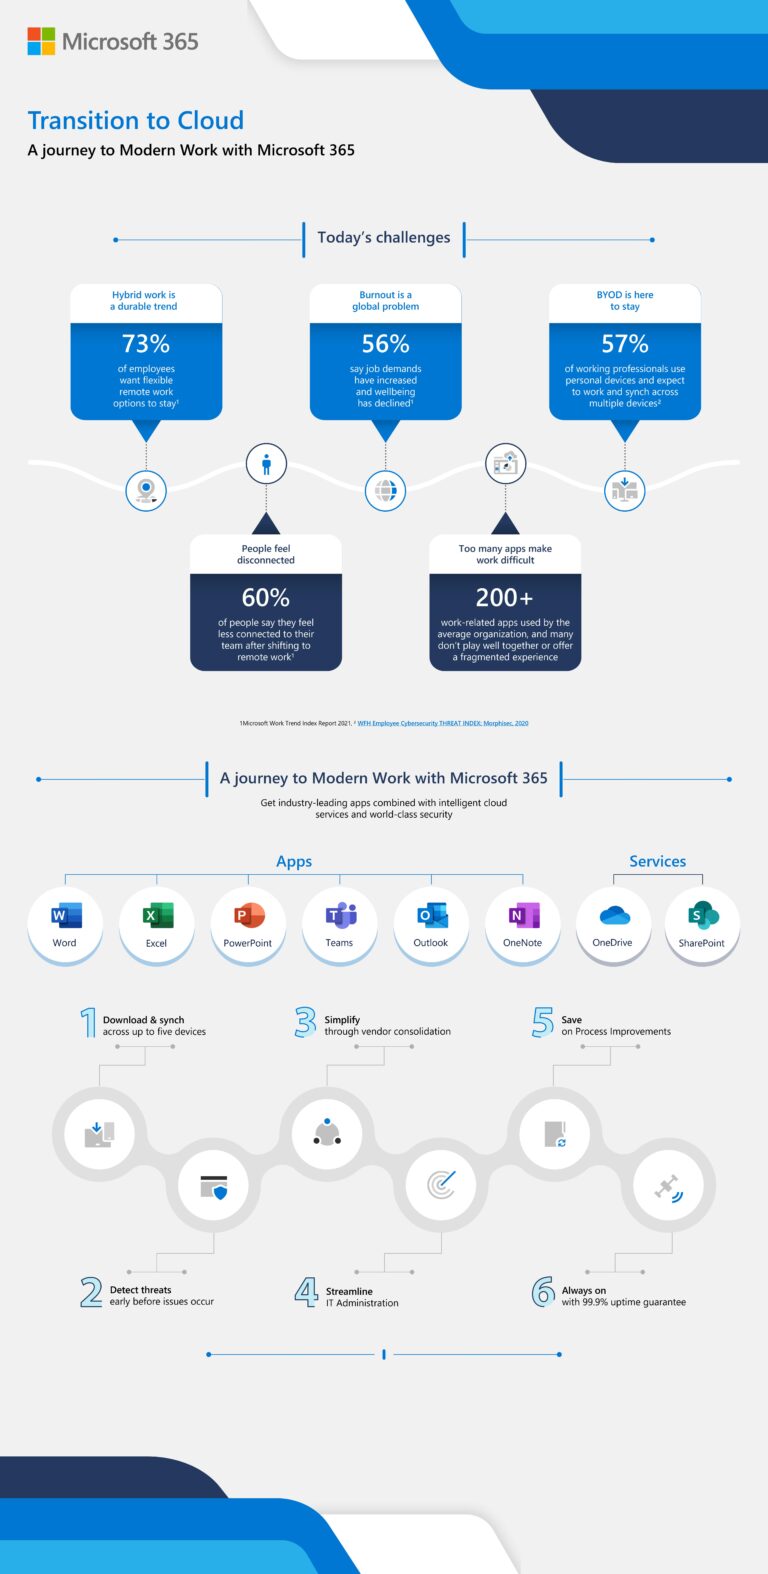 Transition to Cloud: A journey to Modern Work with Microsoft 365